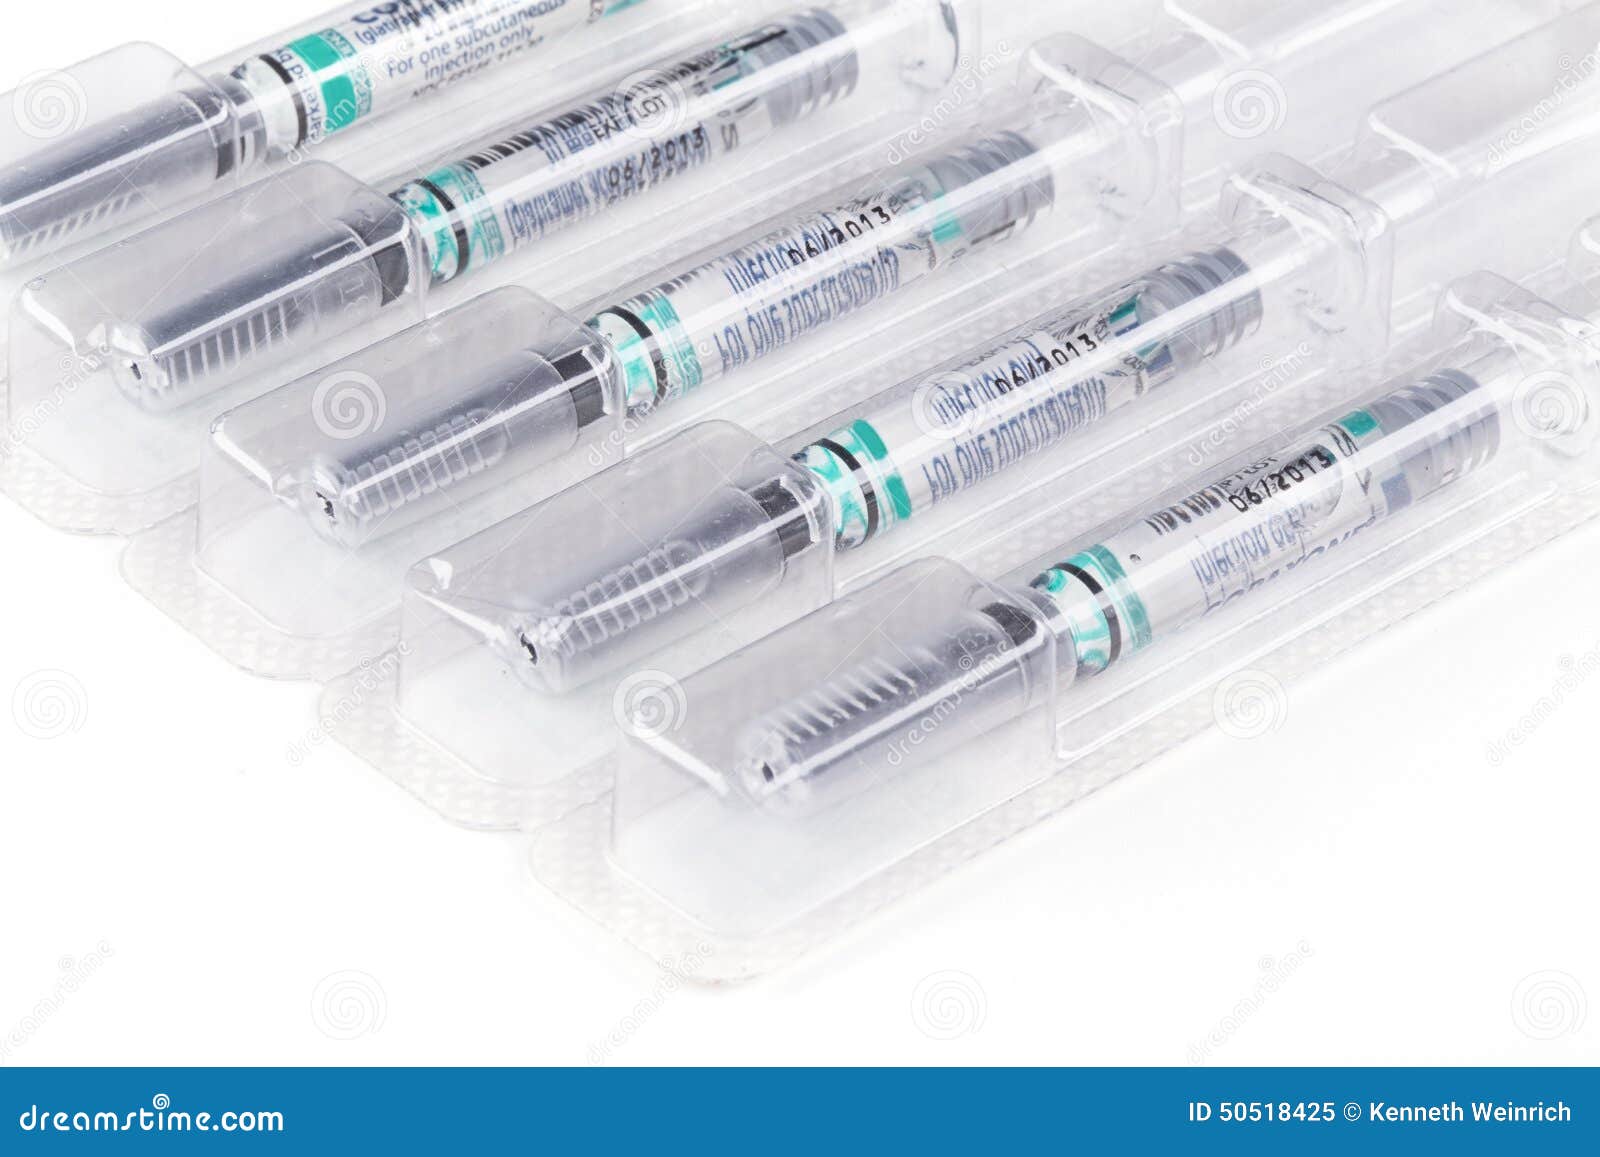 doses of medication in sterile syringes